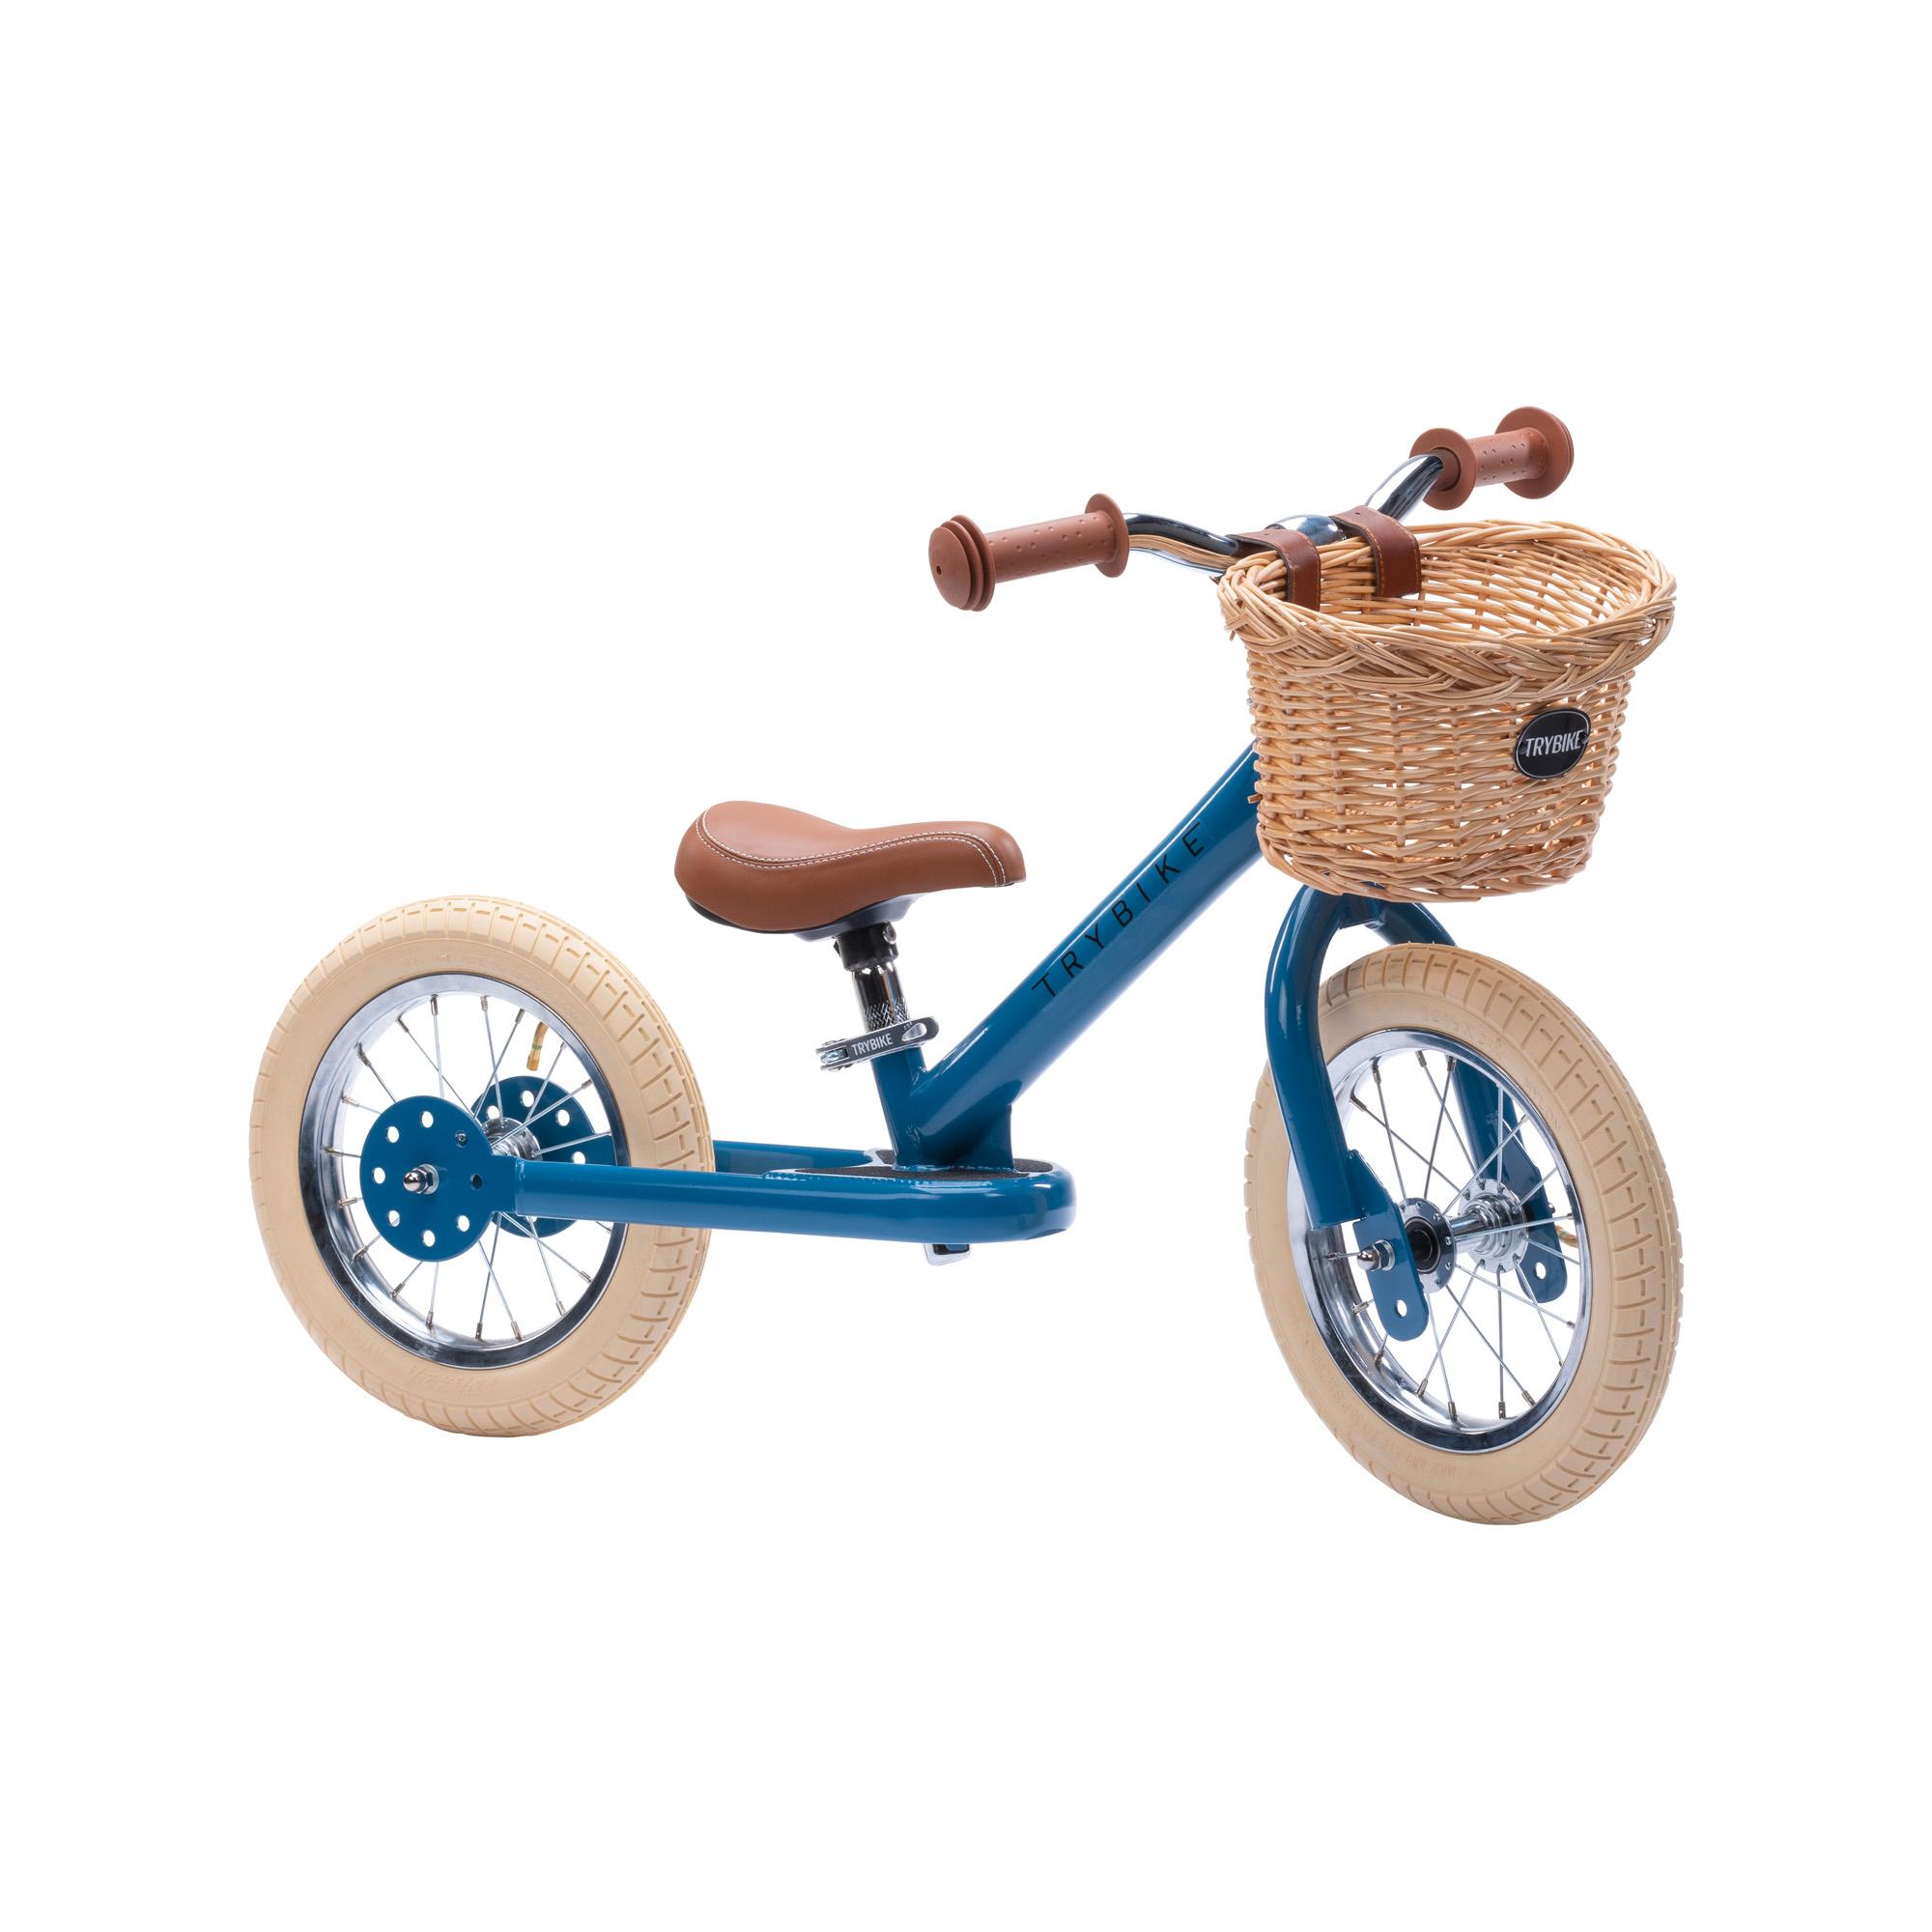 Blue Trybike from a front three-quarter view with a wicker basket on the front.